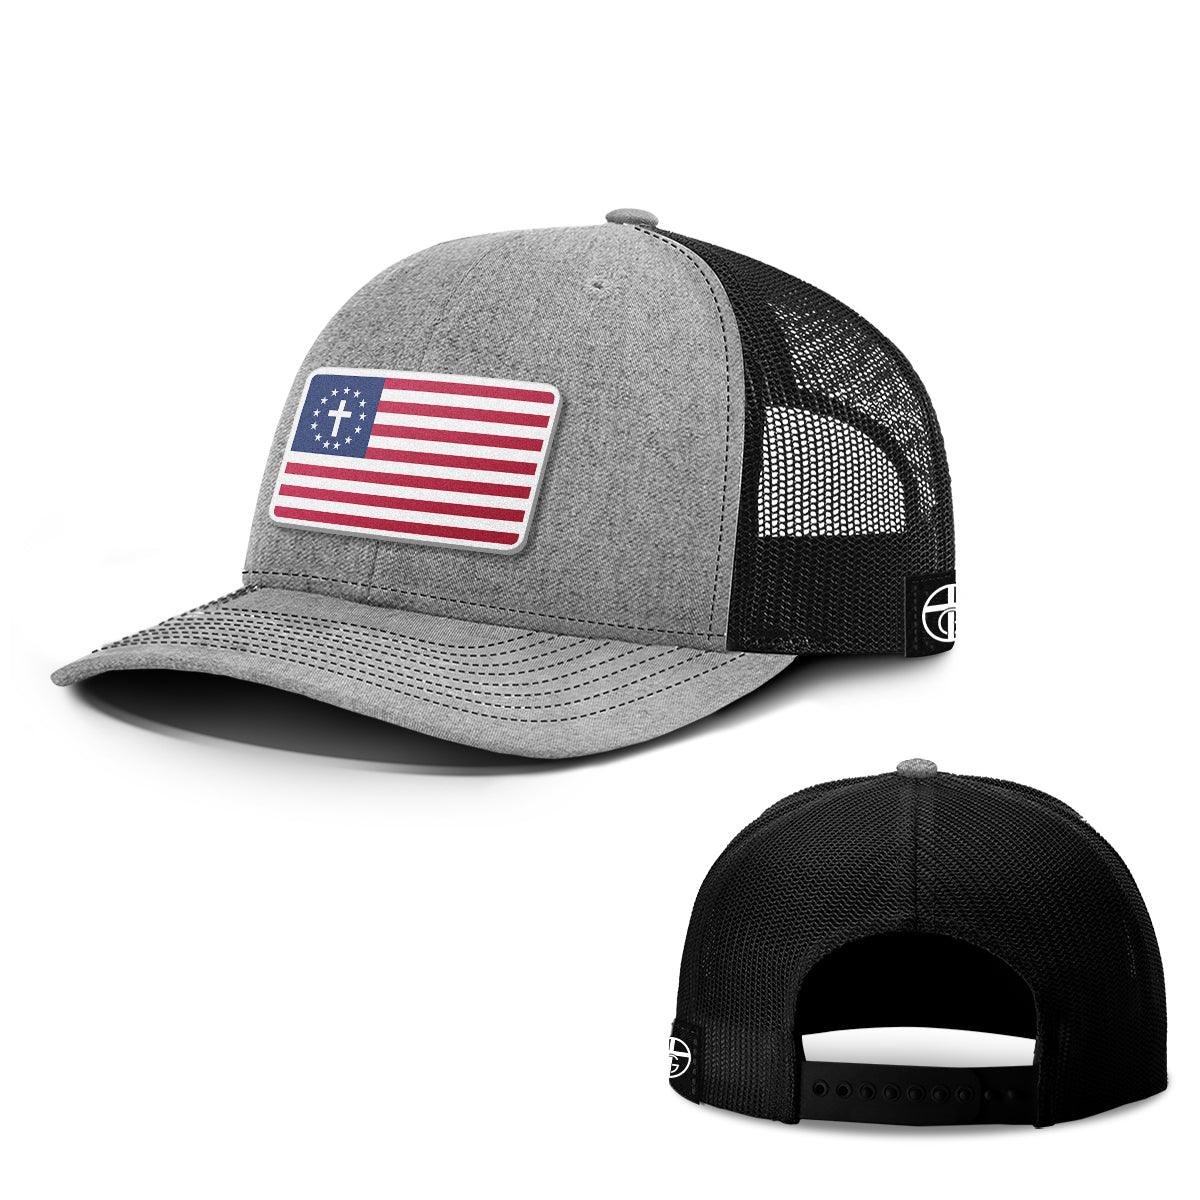 One Nation Under God Patch Hats - Our True God